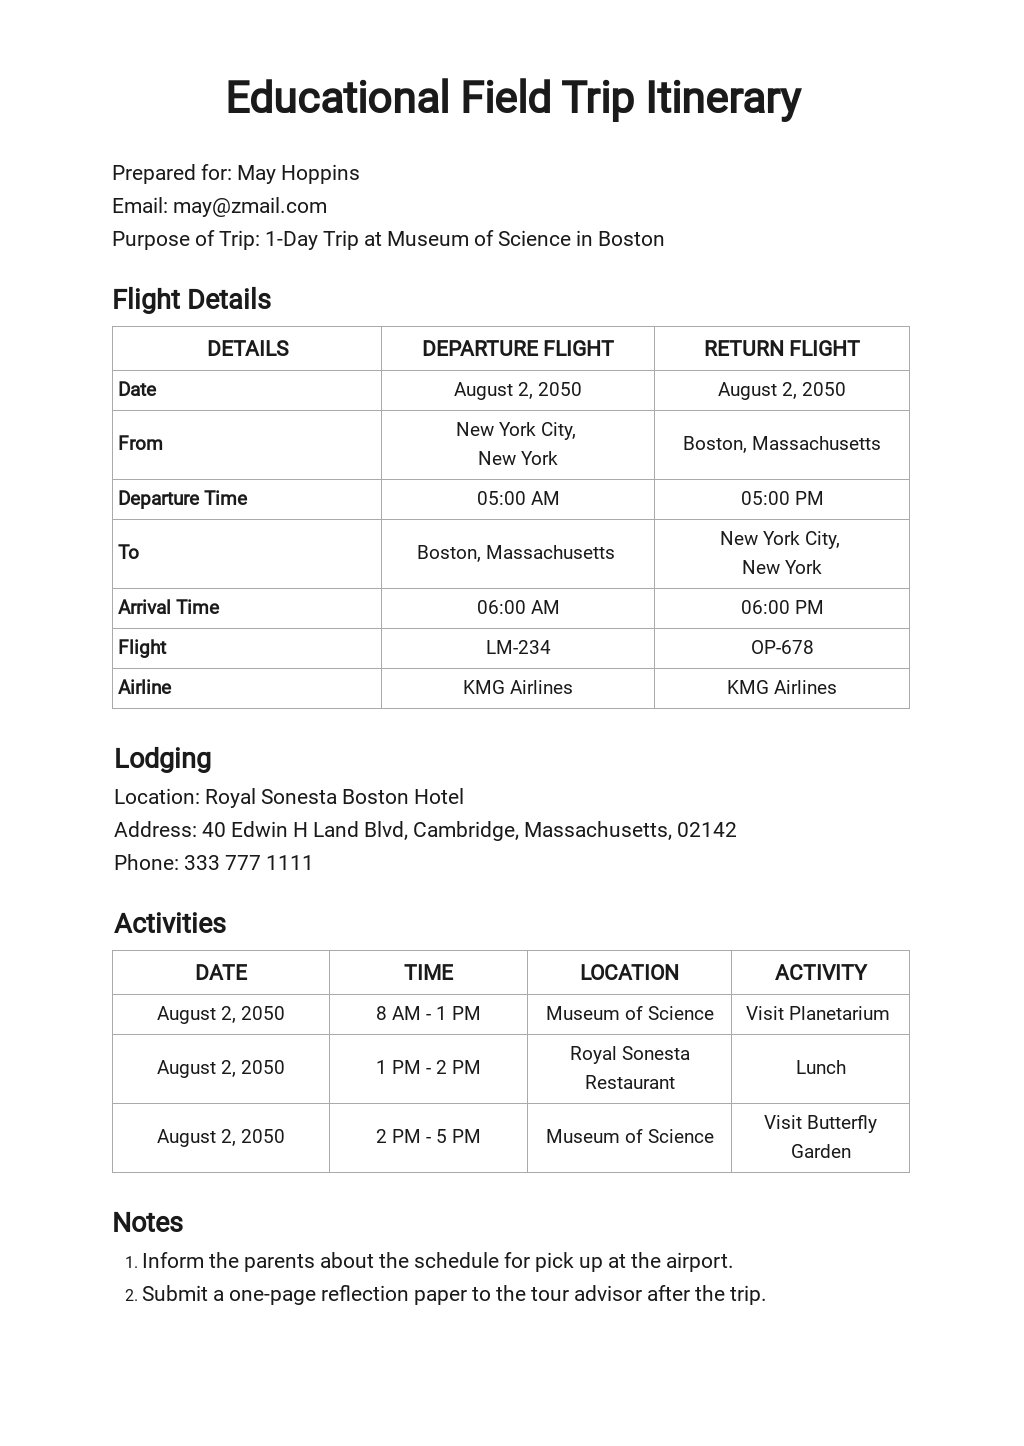 FREE Itinerary Templates in Google Docs